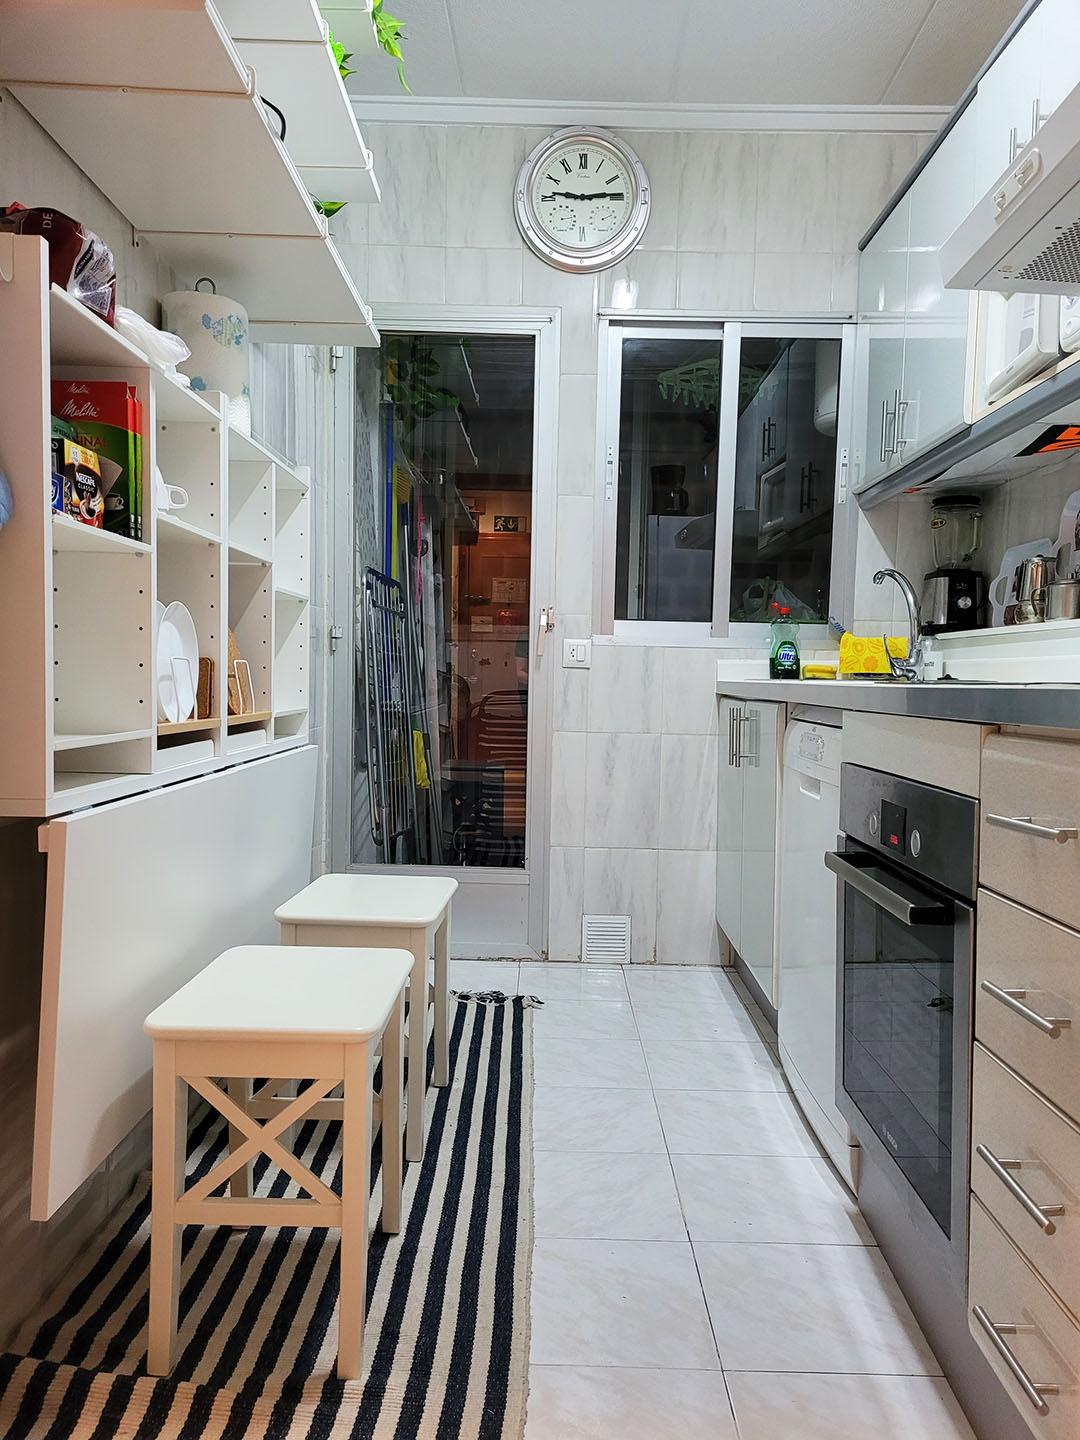 Kitchen with oven, chairs, and shelving,